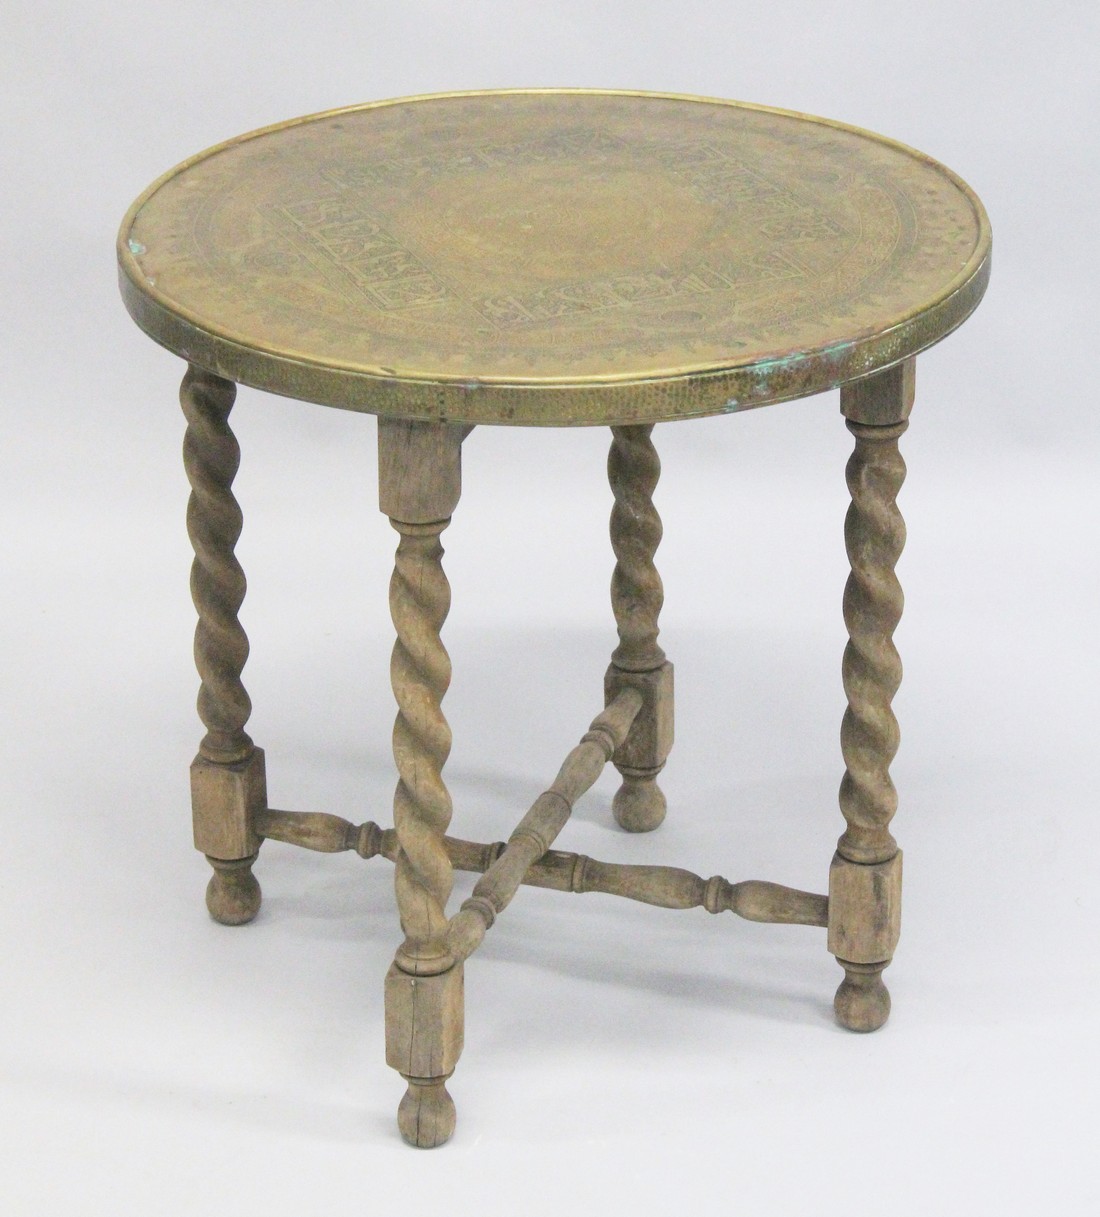 A FINE 19TH CENTURY MAMLUK REVIVAL BRASS TABLE, with folding wooden 'X' form legs, engraved with